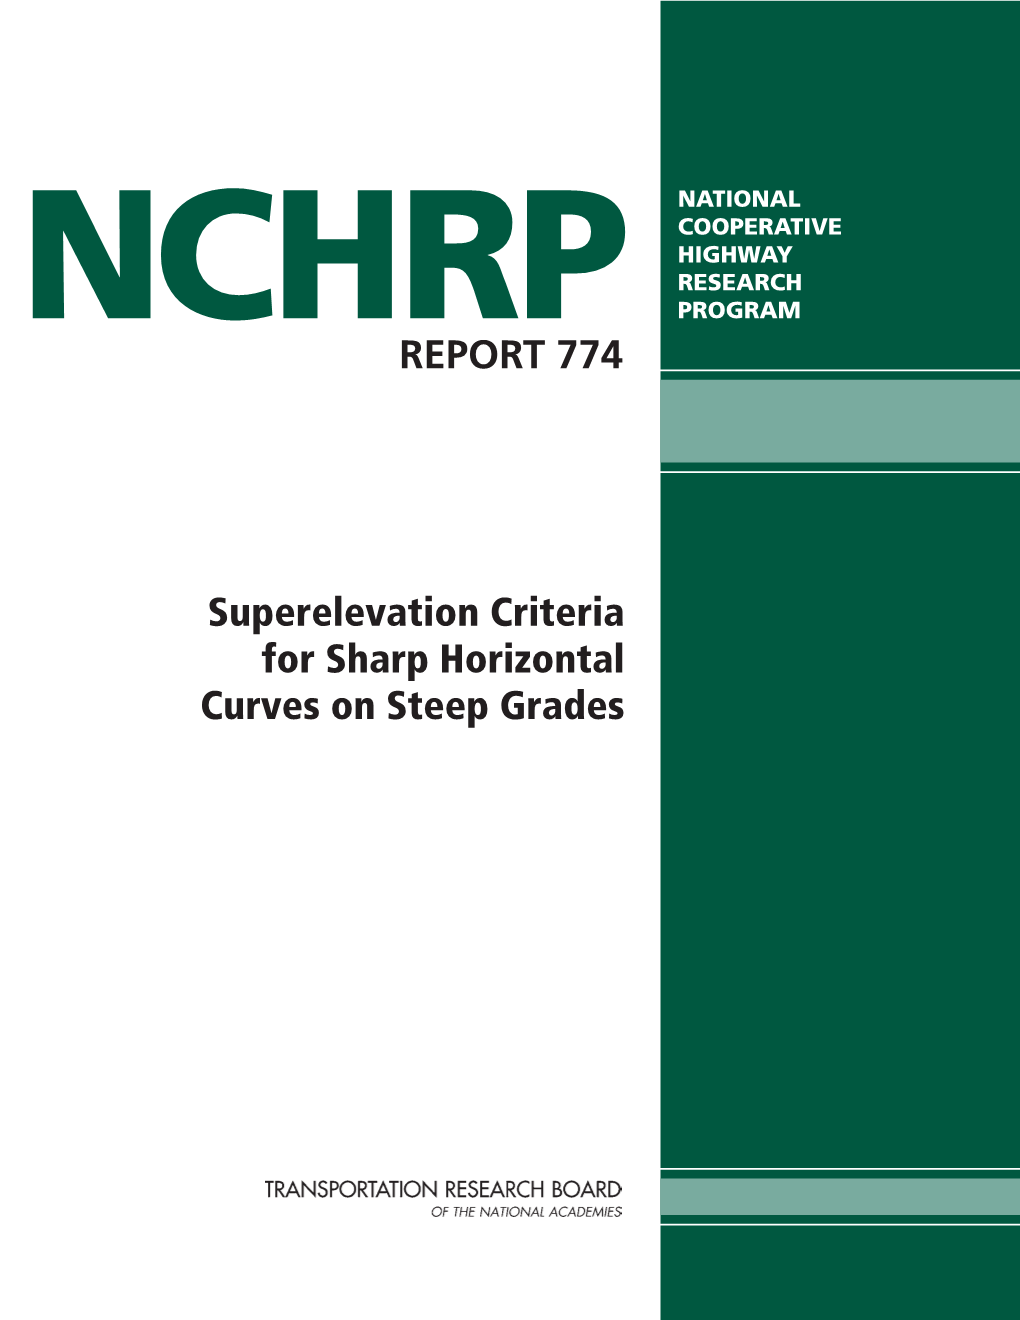 NCHRP Report 774 – Superelevation Criteria for Sharp Horizontal Curves